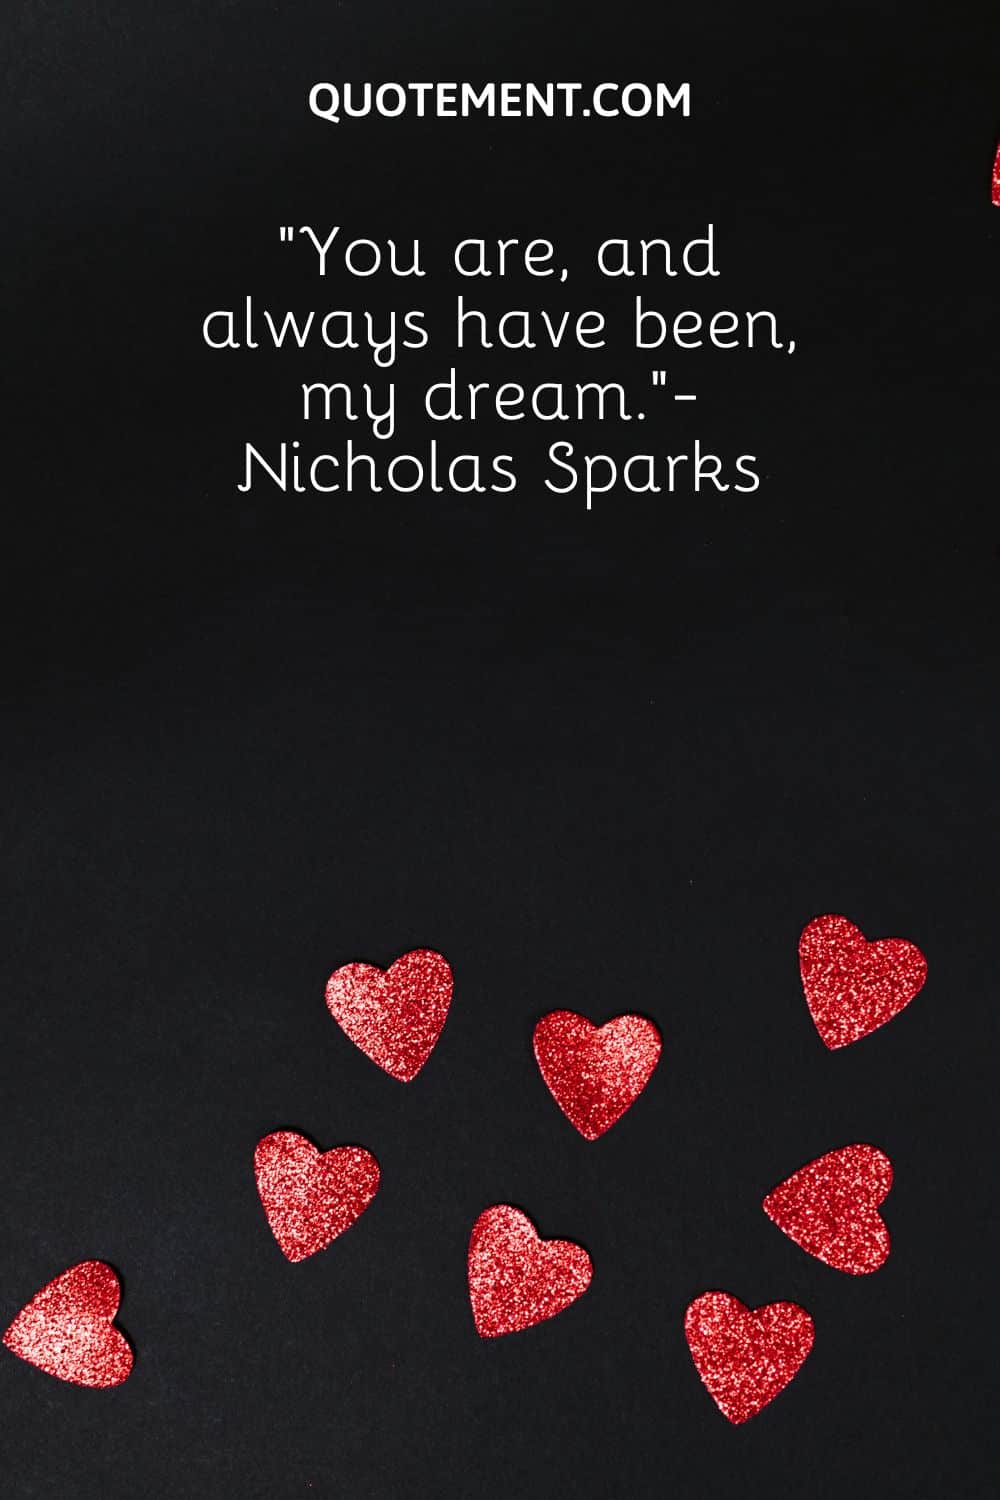 “You are, and always have been, my dream.”- Nicholas Sparks